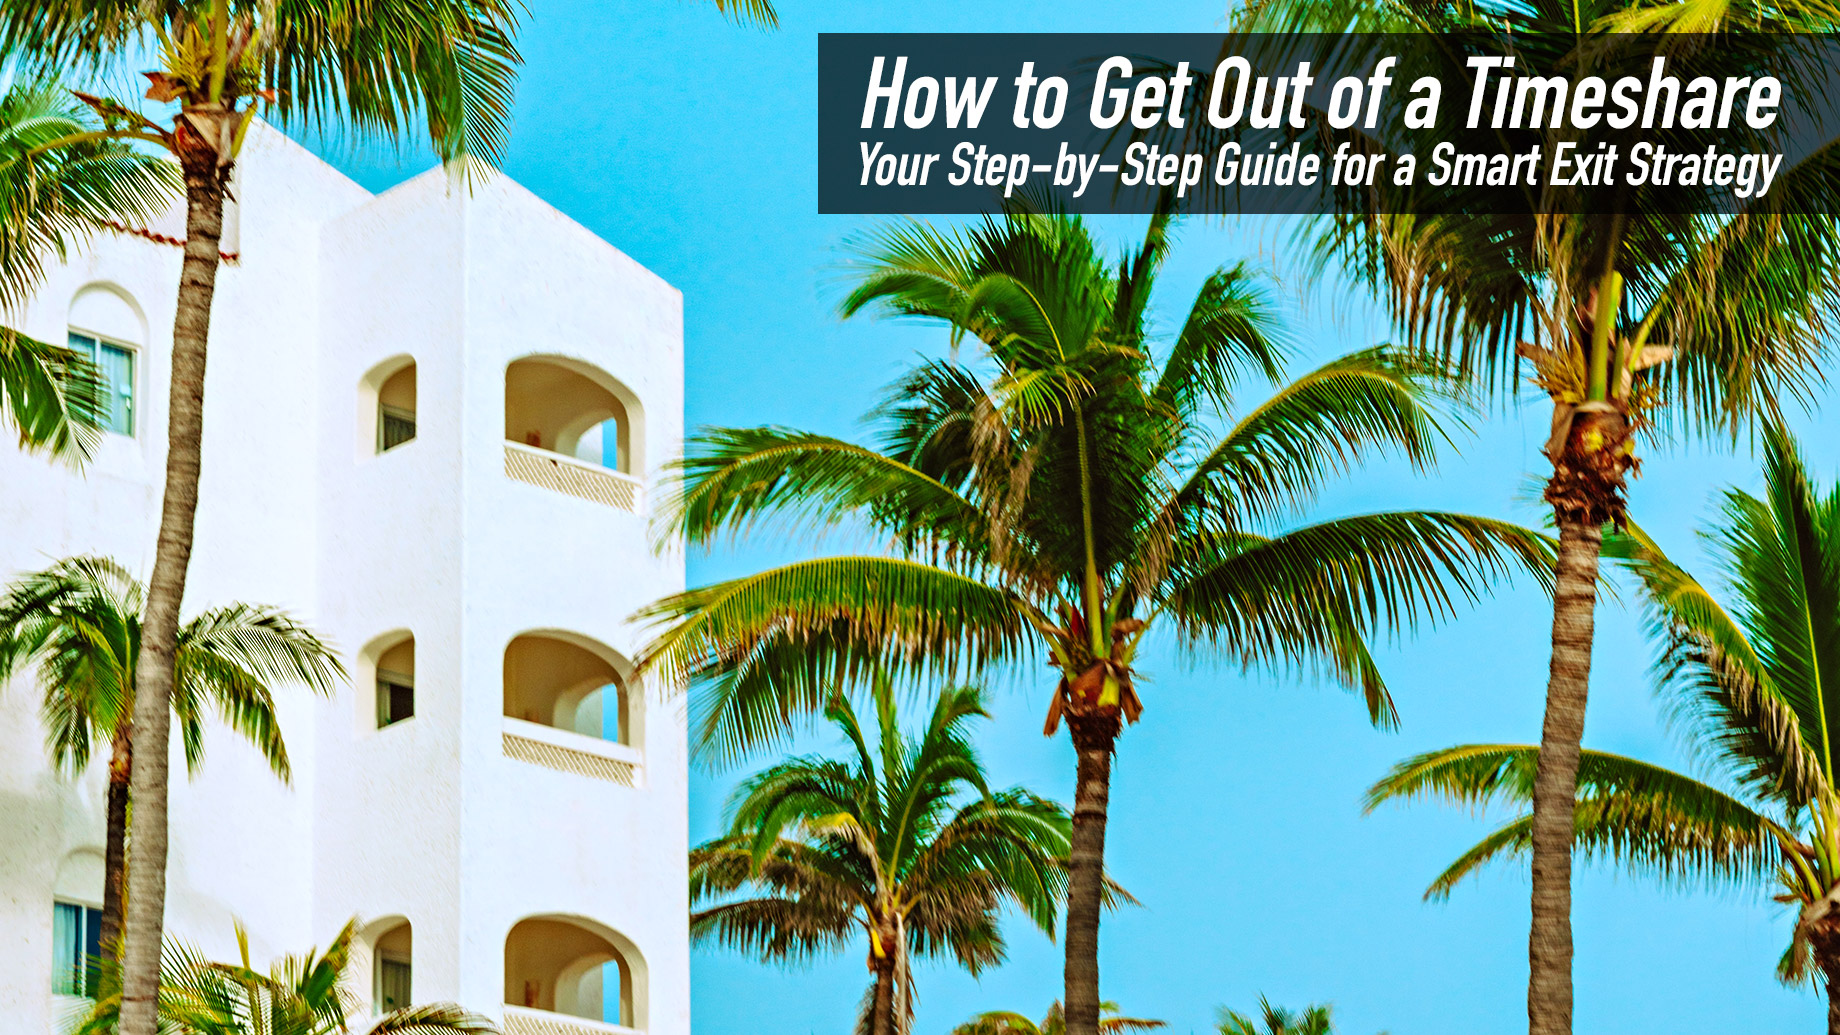 How to Get Out of a Timeshare - Your Step-by-Step Guide for a Smart Exit Strategy